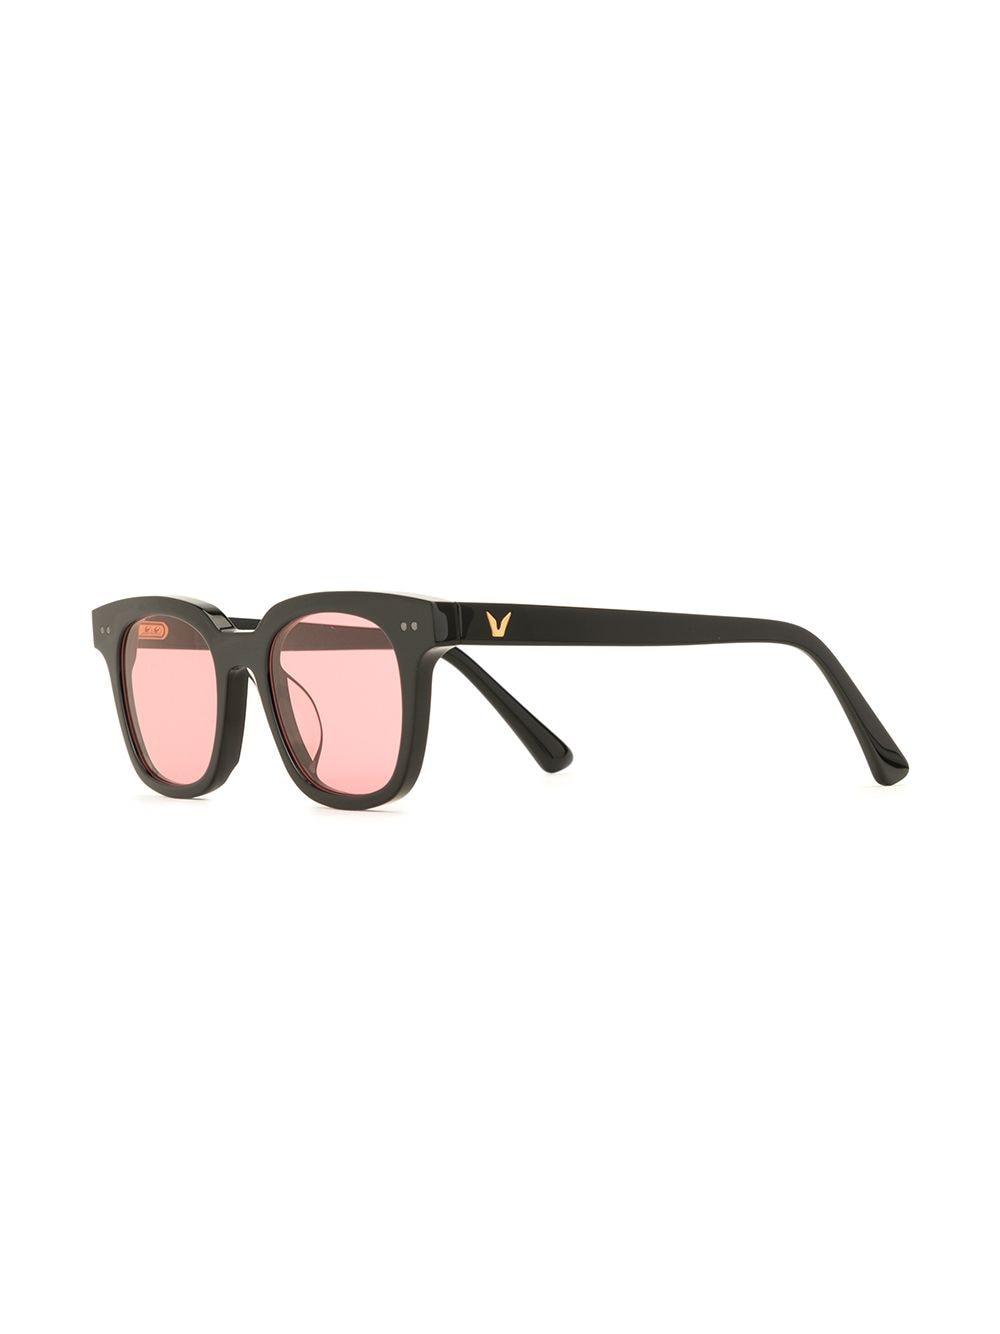 Gentle Monster South Side 01 (red) Sunglasses in Black | Lyst